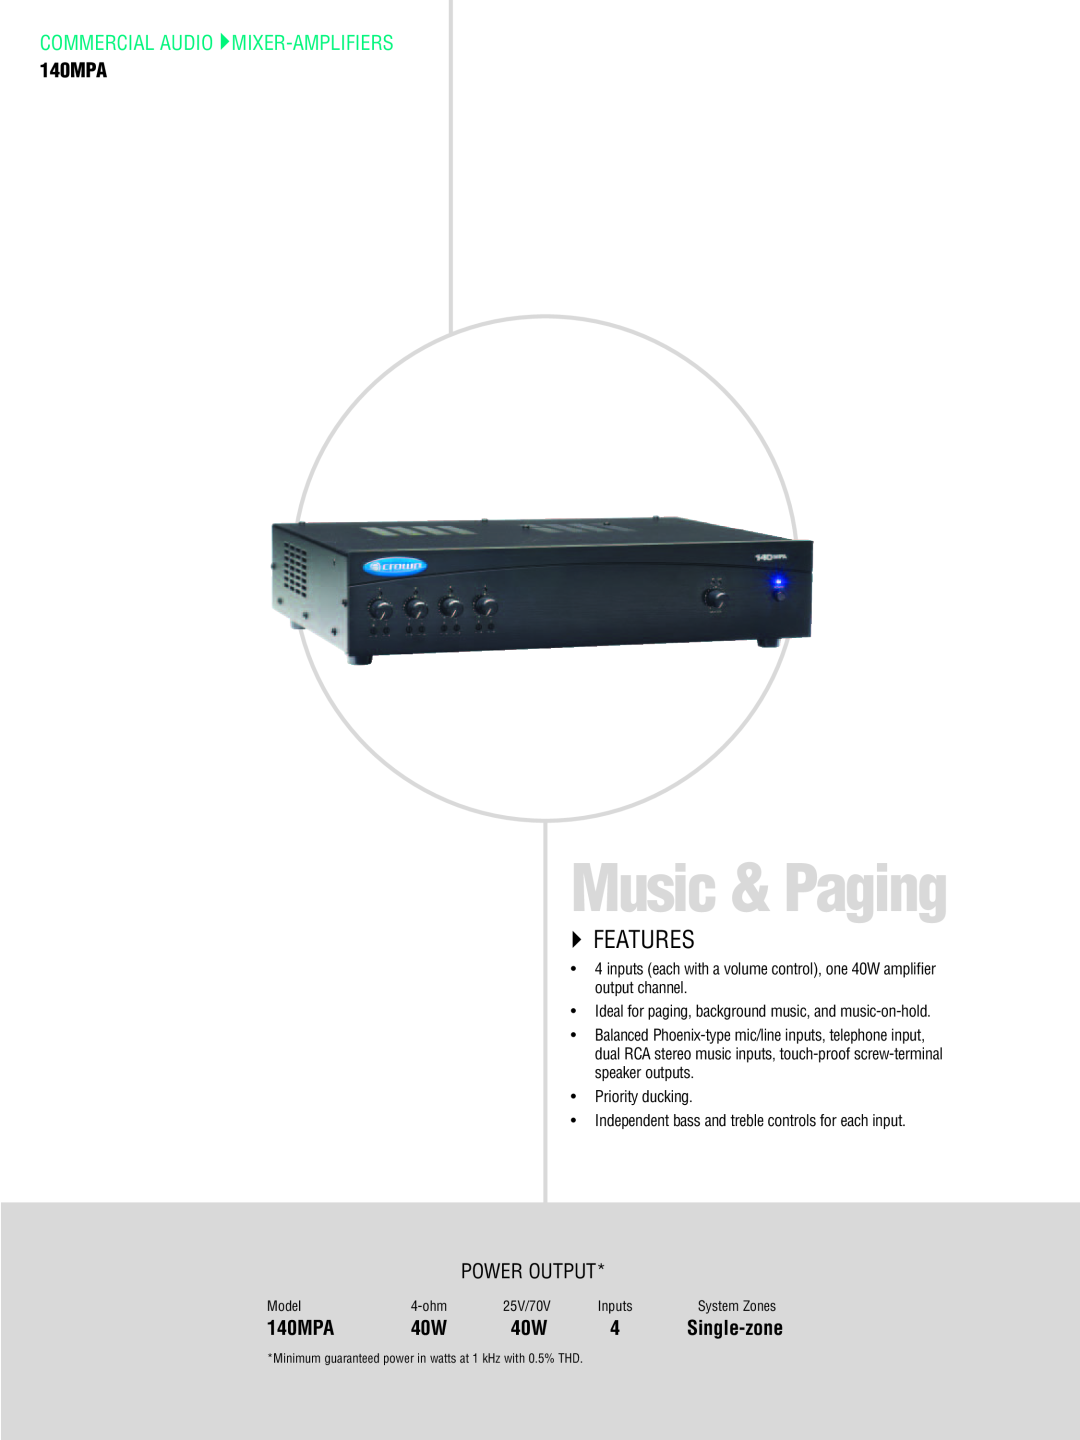 Crown CTS 1200, CTS 3000, CTS 2000 Music & Paging, `` Features, Commercial Audio Mixer-Amplifiers, 140MPA, Power Output 